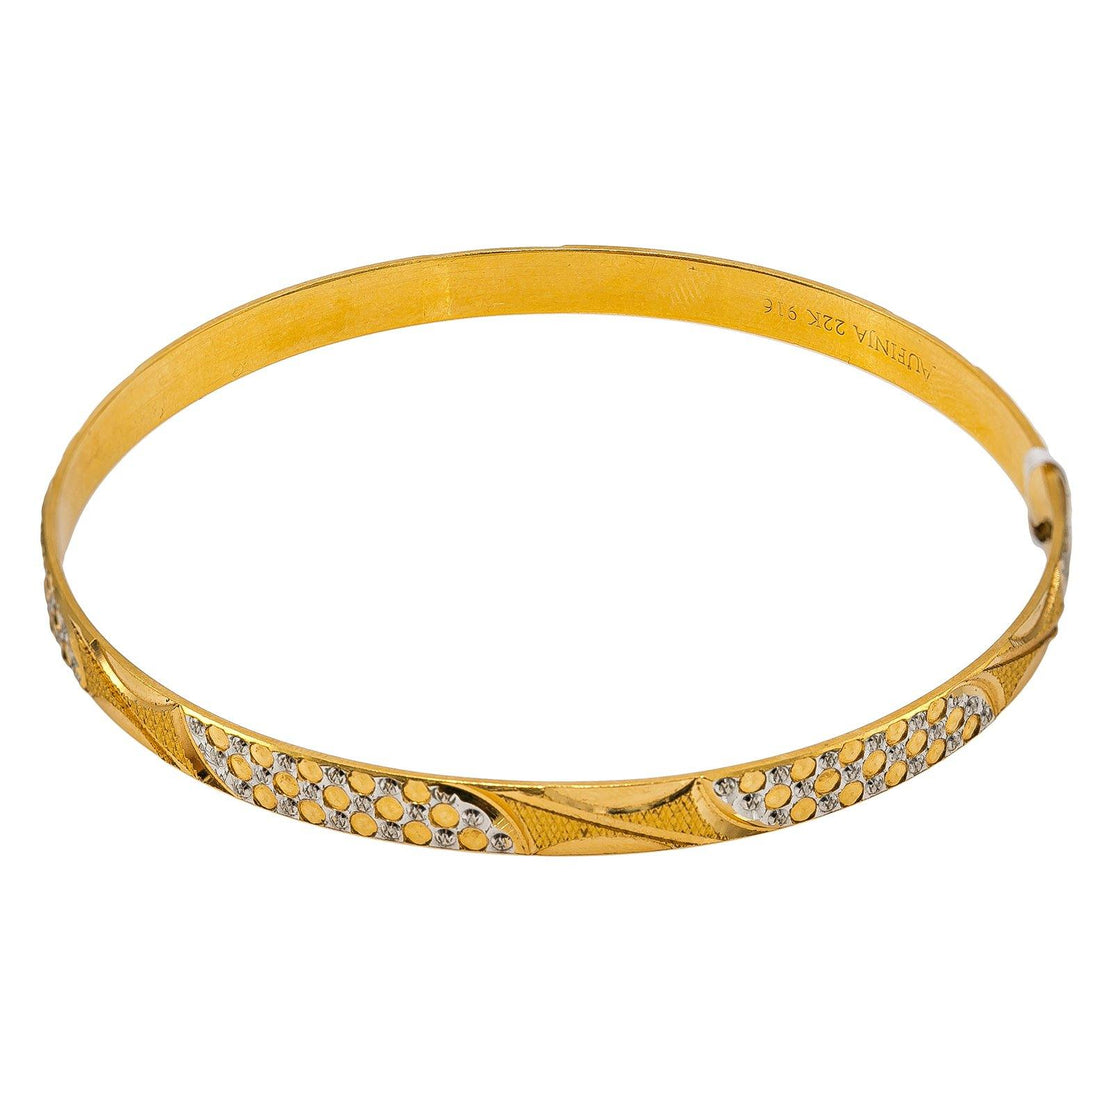 Purchase the High-Quality White Gold Bracelets